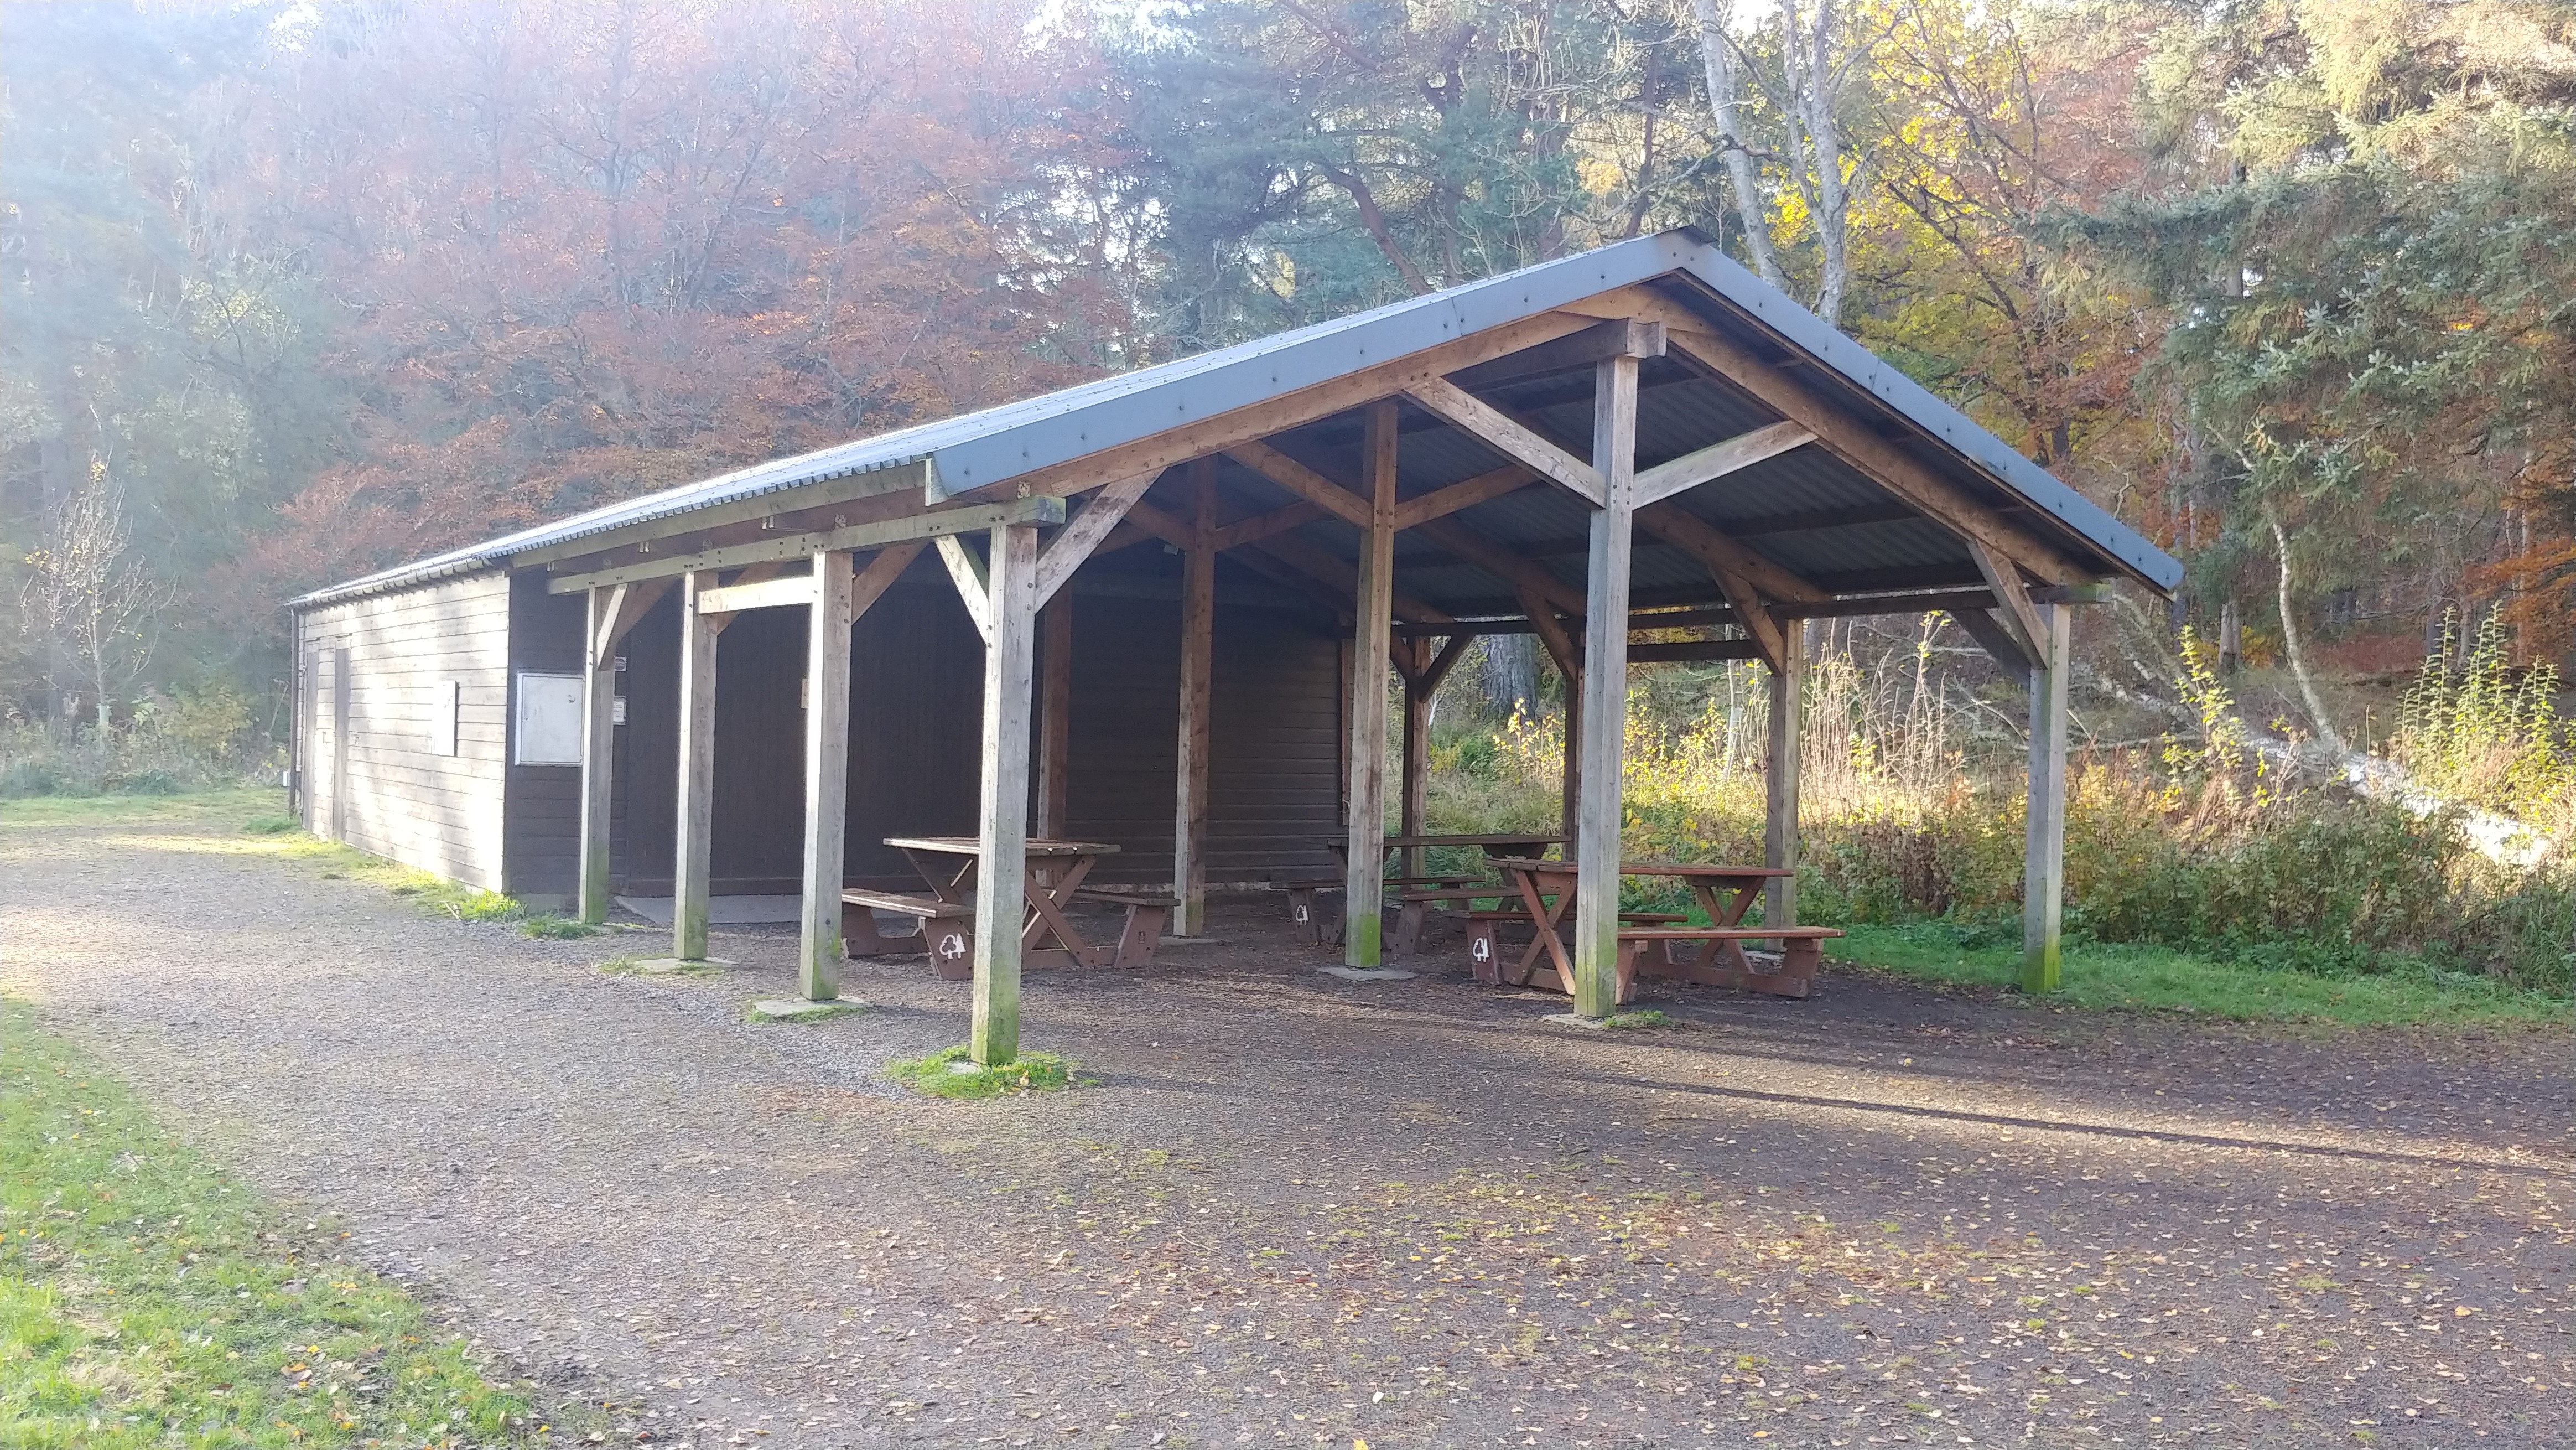 Exterior of the Kinnoull shed, showing a covered outdoor area with attractive timber beams